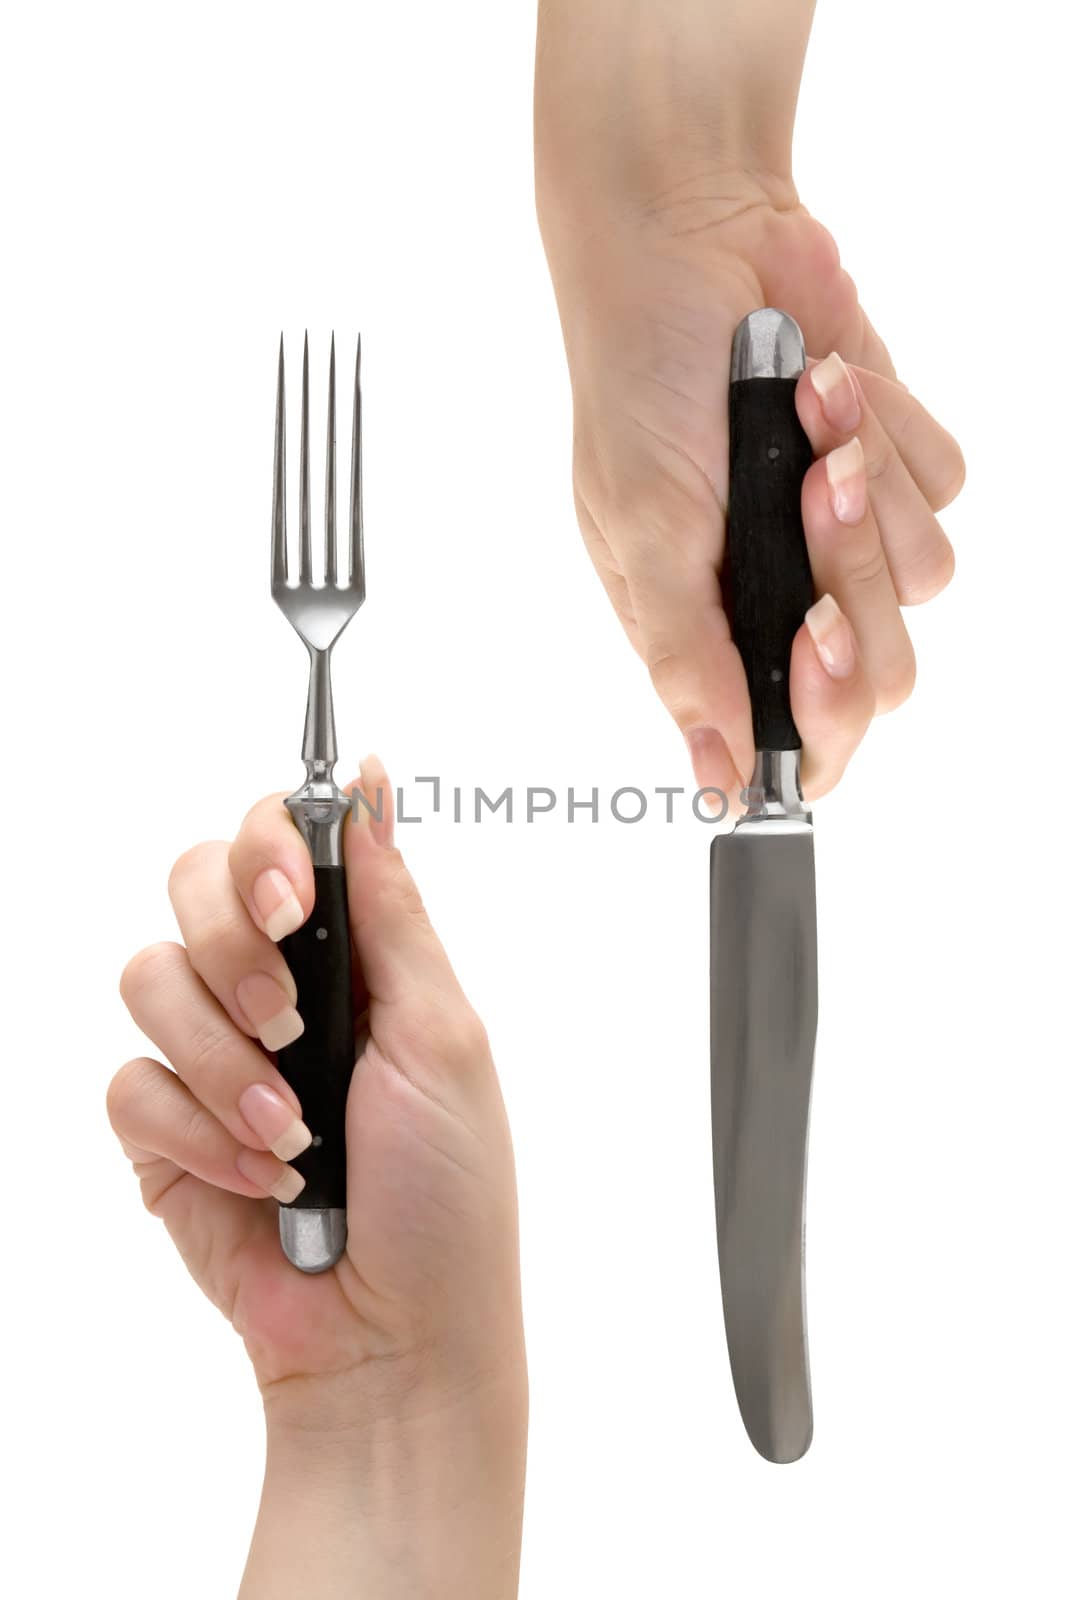 Female hands holding fork and knife. Isolated on a white background.